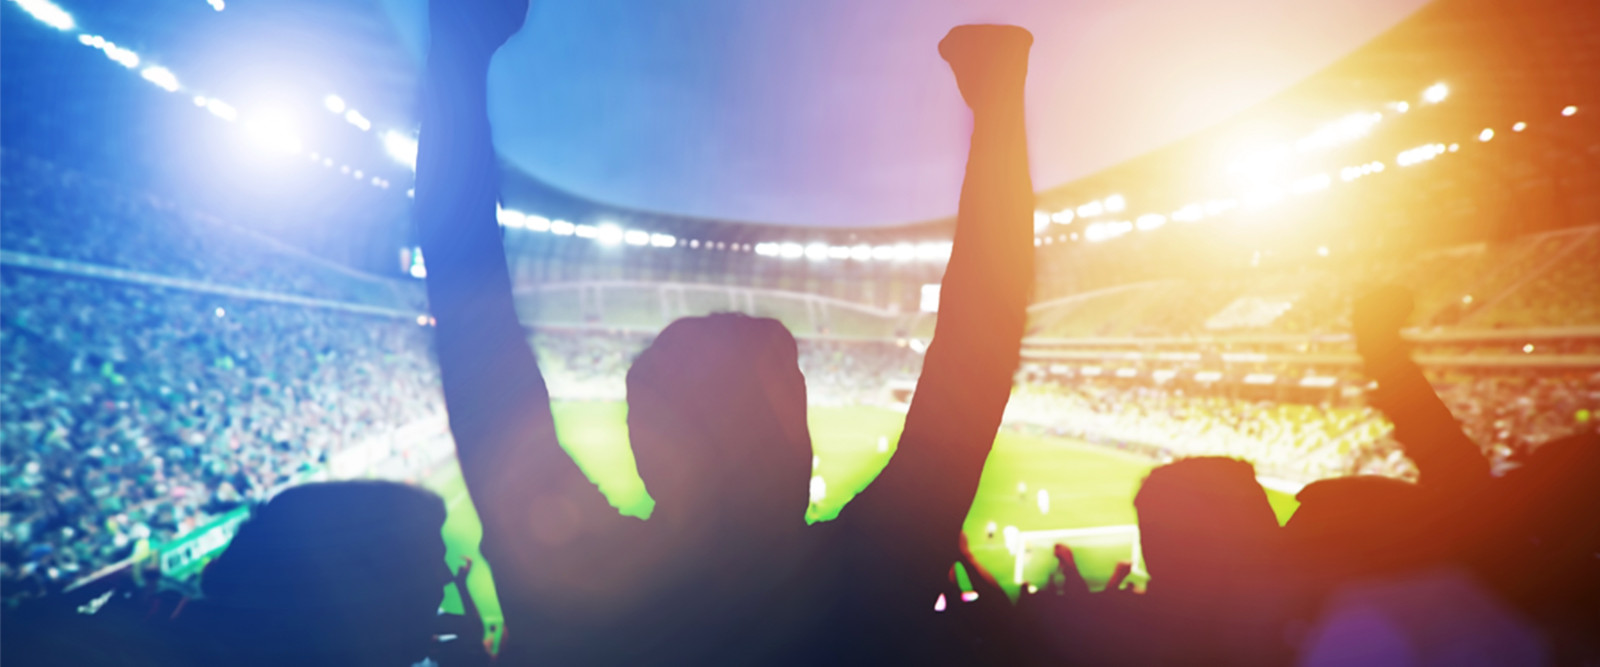 Data scores big for the sports fan experience